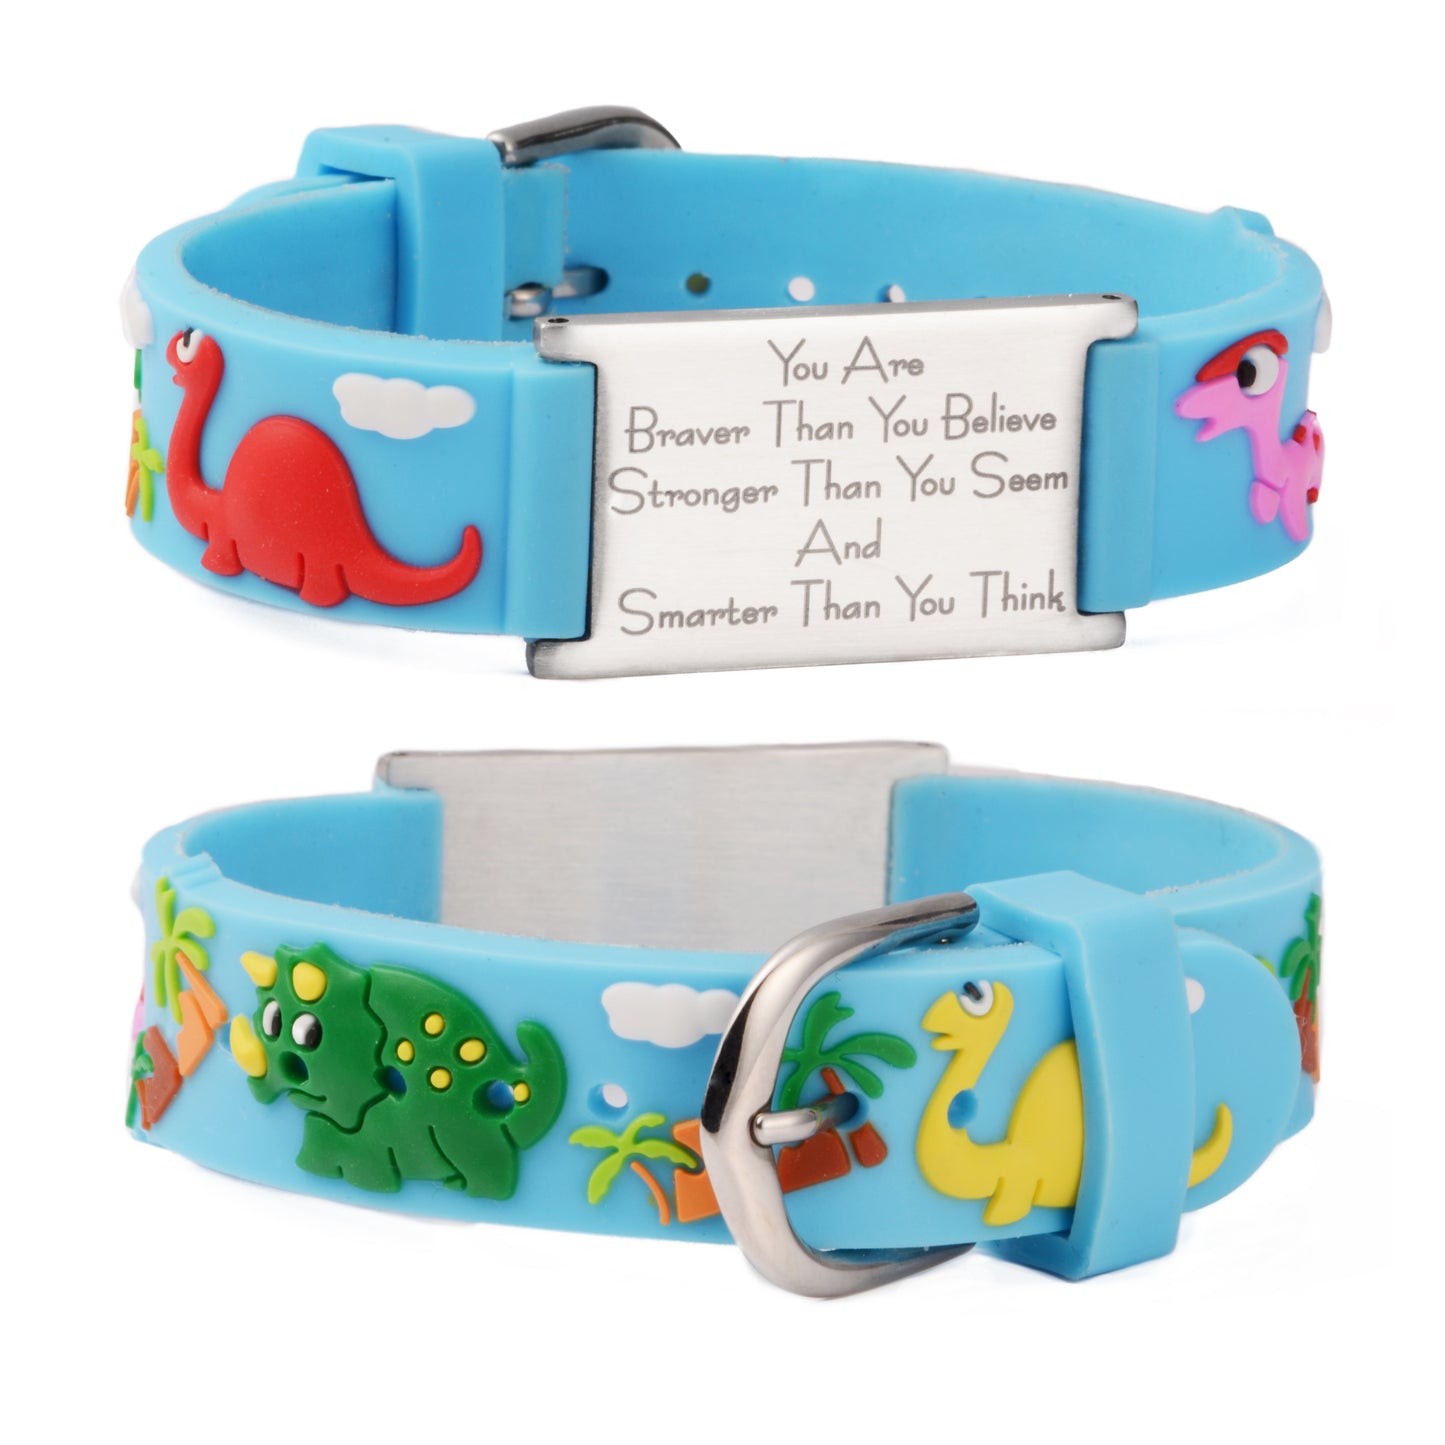 You are Braver Than You Believe Stronger Than You Seem and Smarter Than You Think Inspirational Bracelet for kids-Blue-Dinosaur